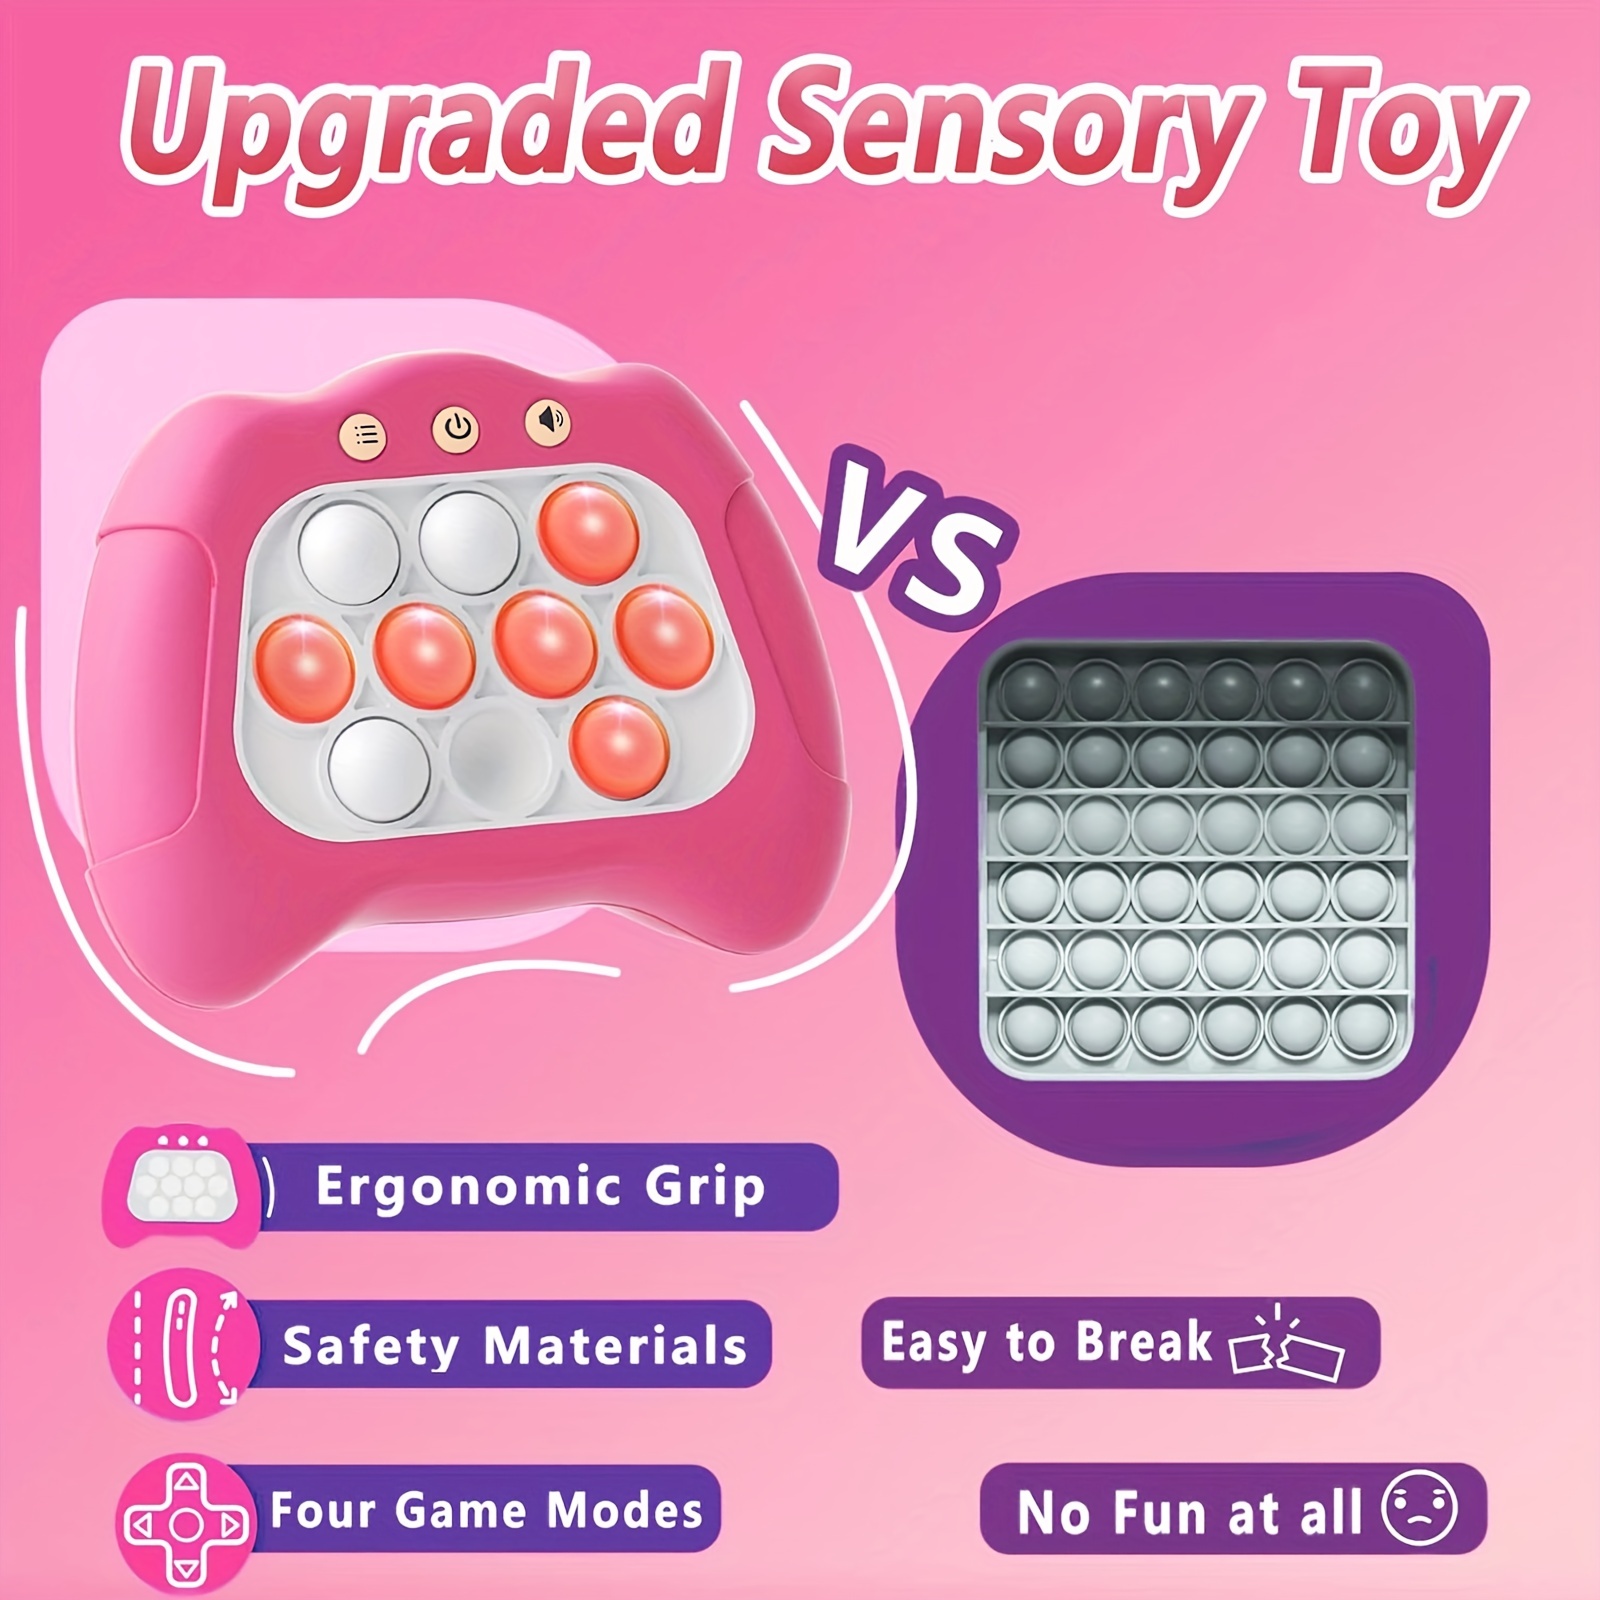  Fast Push Handheld Game, Pop Light Up Game Toys Upgraded  Version 2, Lightly Push to Turn Off The Lit Bubbles.Fidget Sensory Toys for  6 7 8 9 Year Old Kids Boys